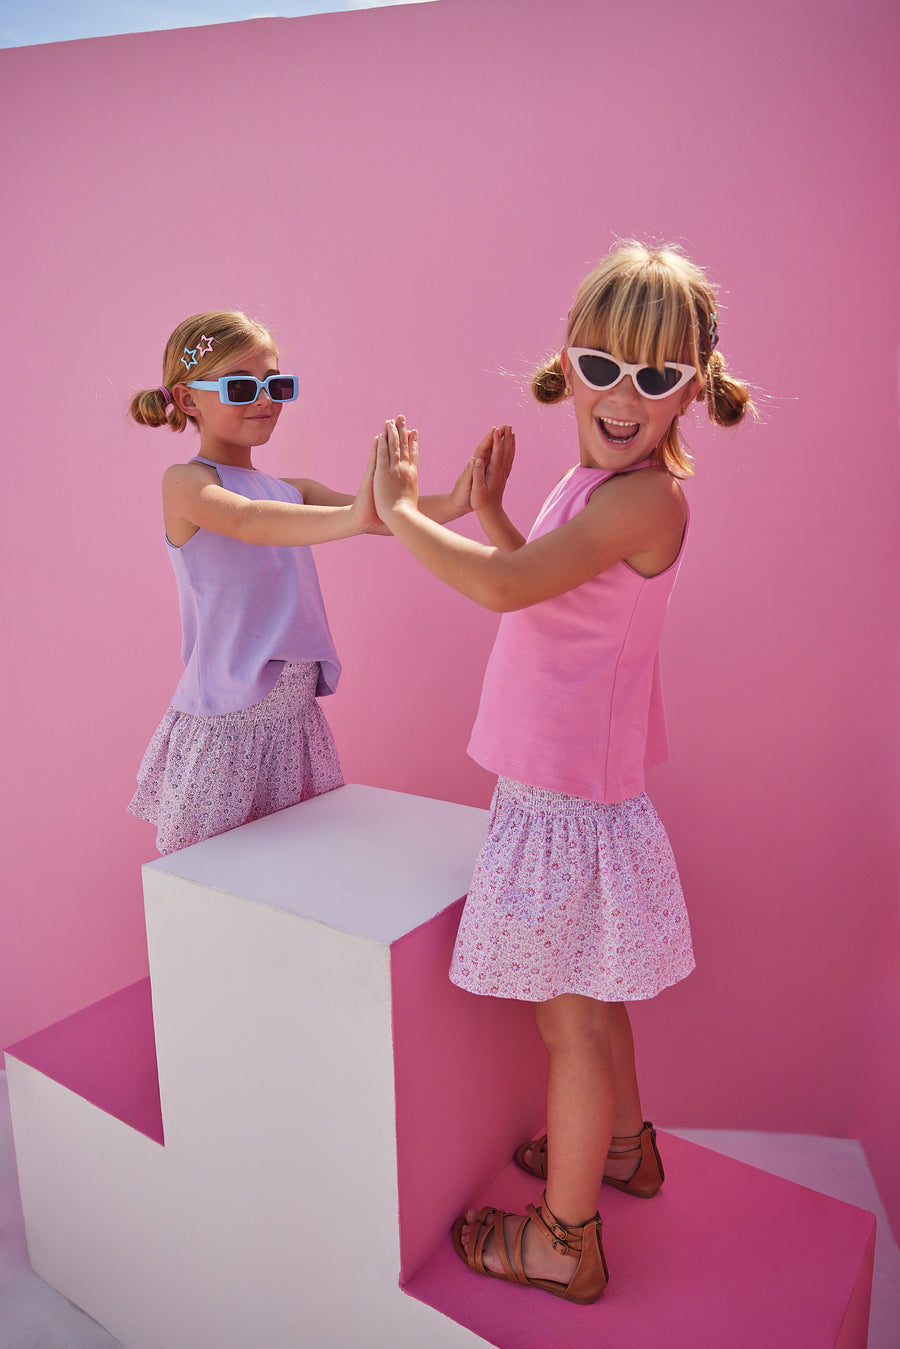 BISBY girls rocking our new Shirred Circle Skirts in our Pink and Purple Daisy patterns. The skirts have ruching along the waist for a stretchy comfortable feel and pair perfectly back with our Halter Tops in Lavender or Pink.